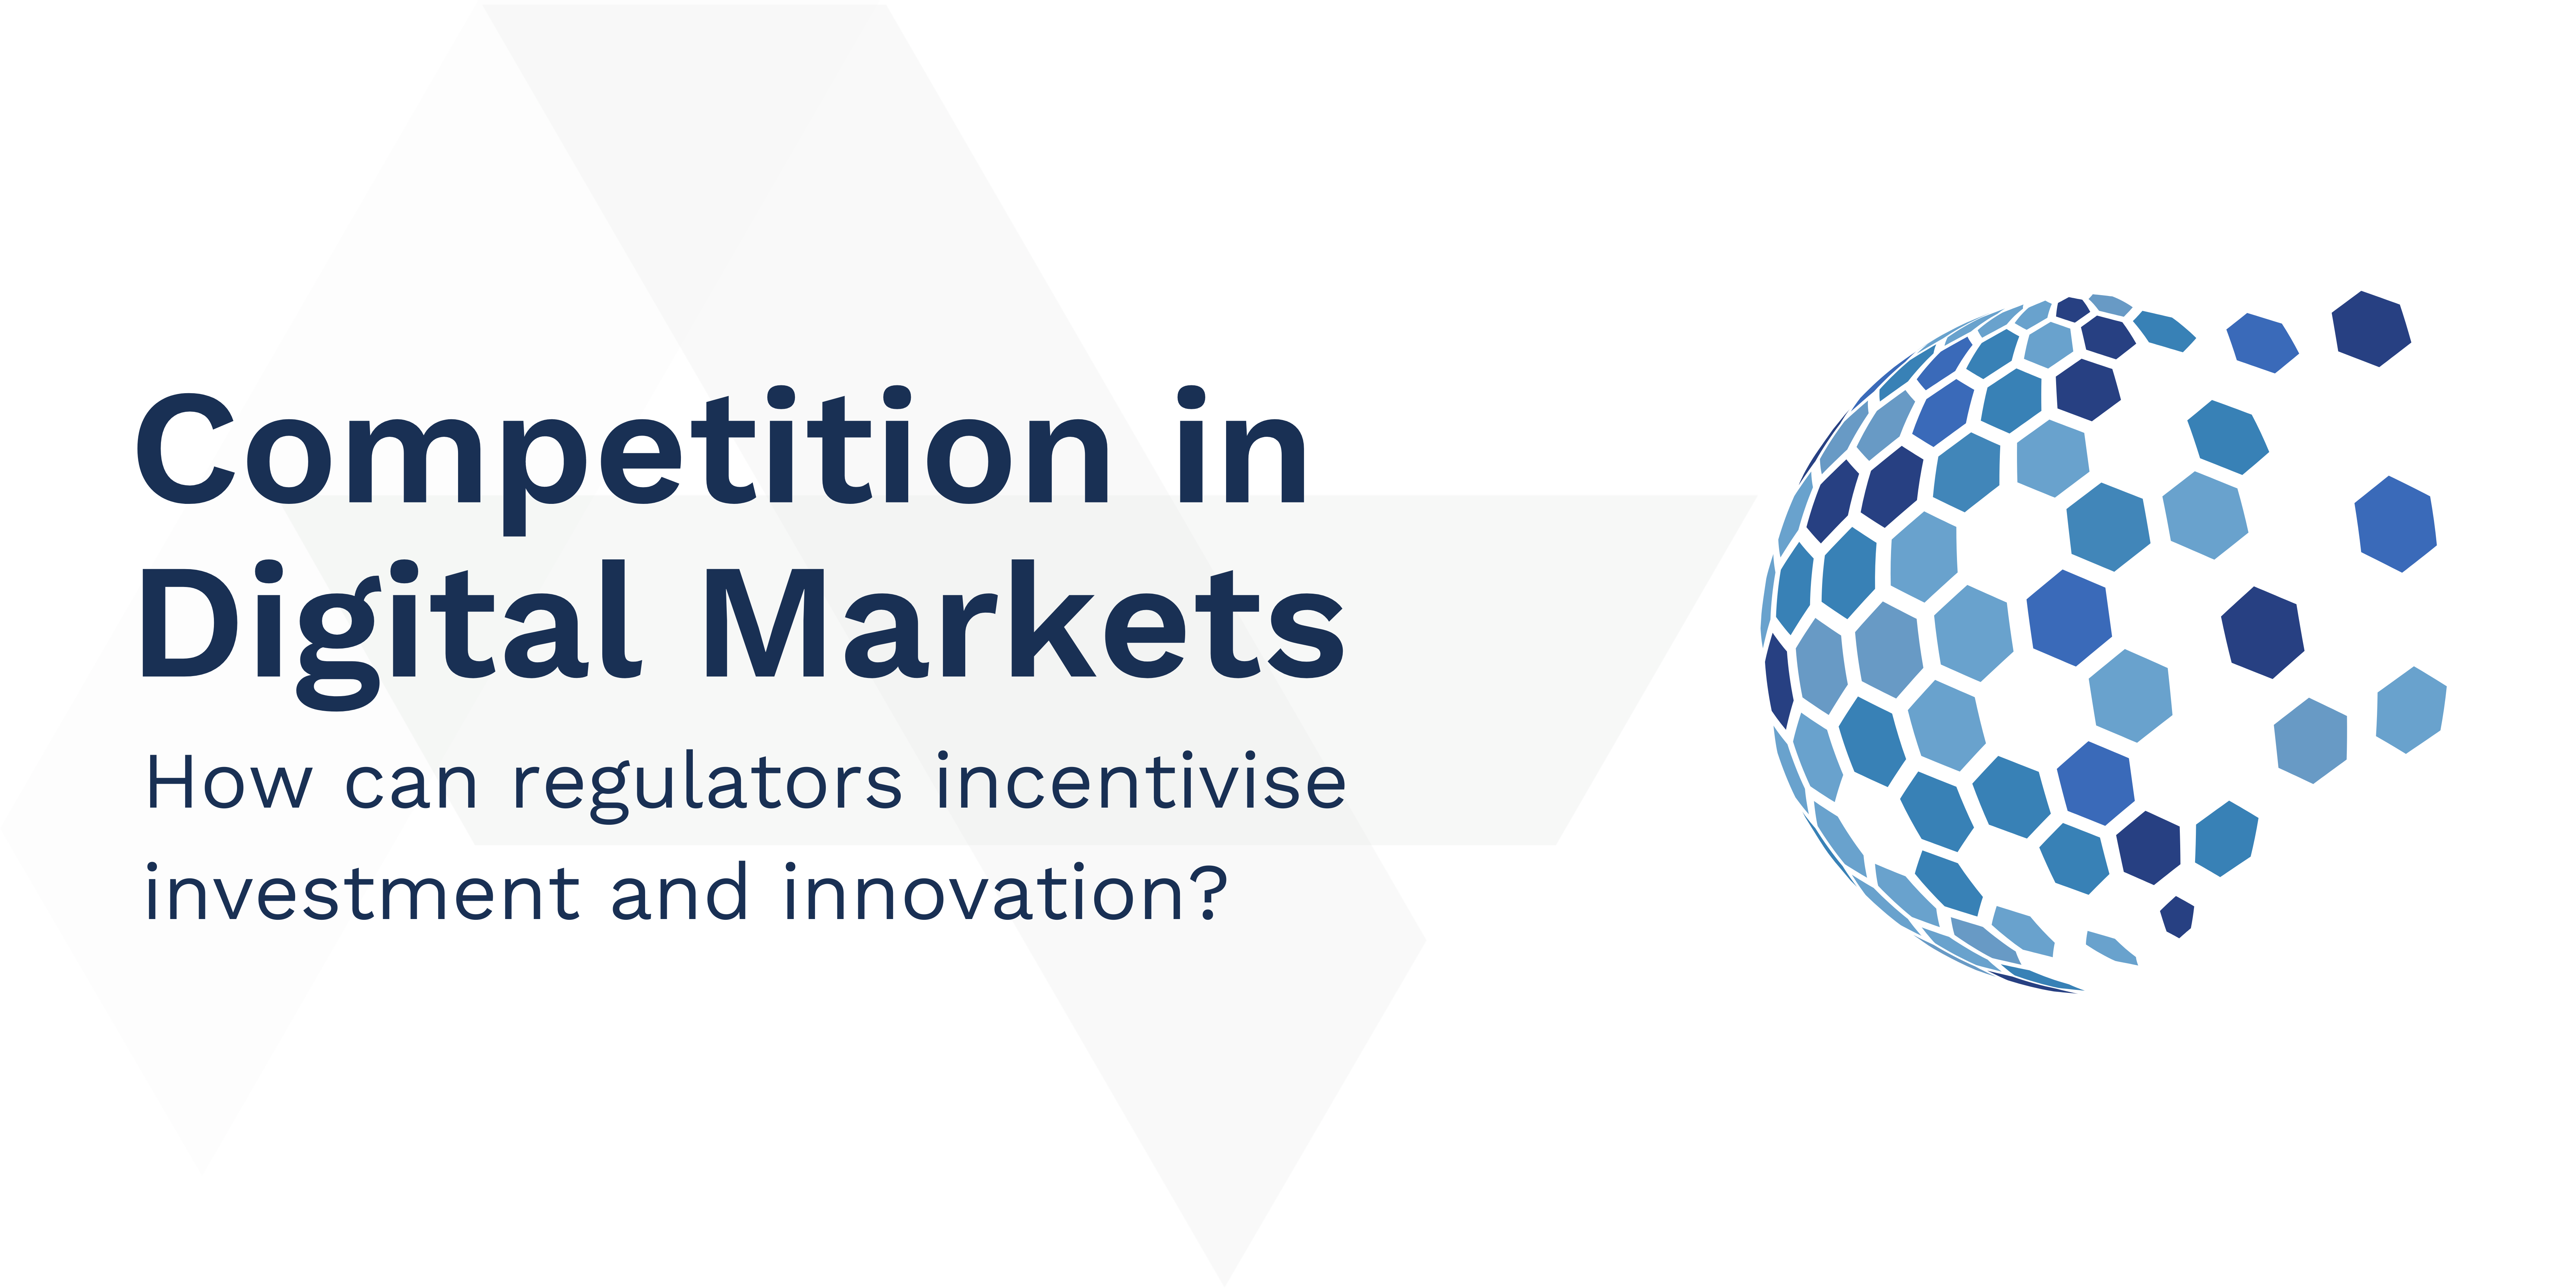 Competition in Digital Markets: How can regulators incentivise investment and innovation?